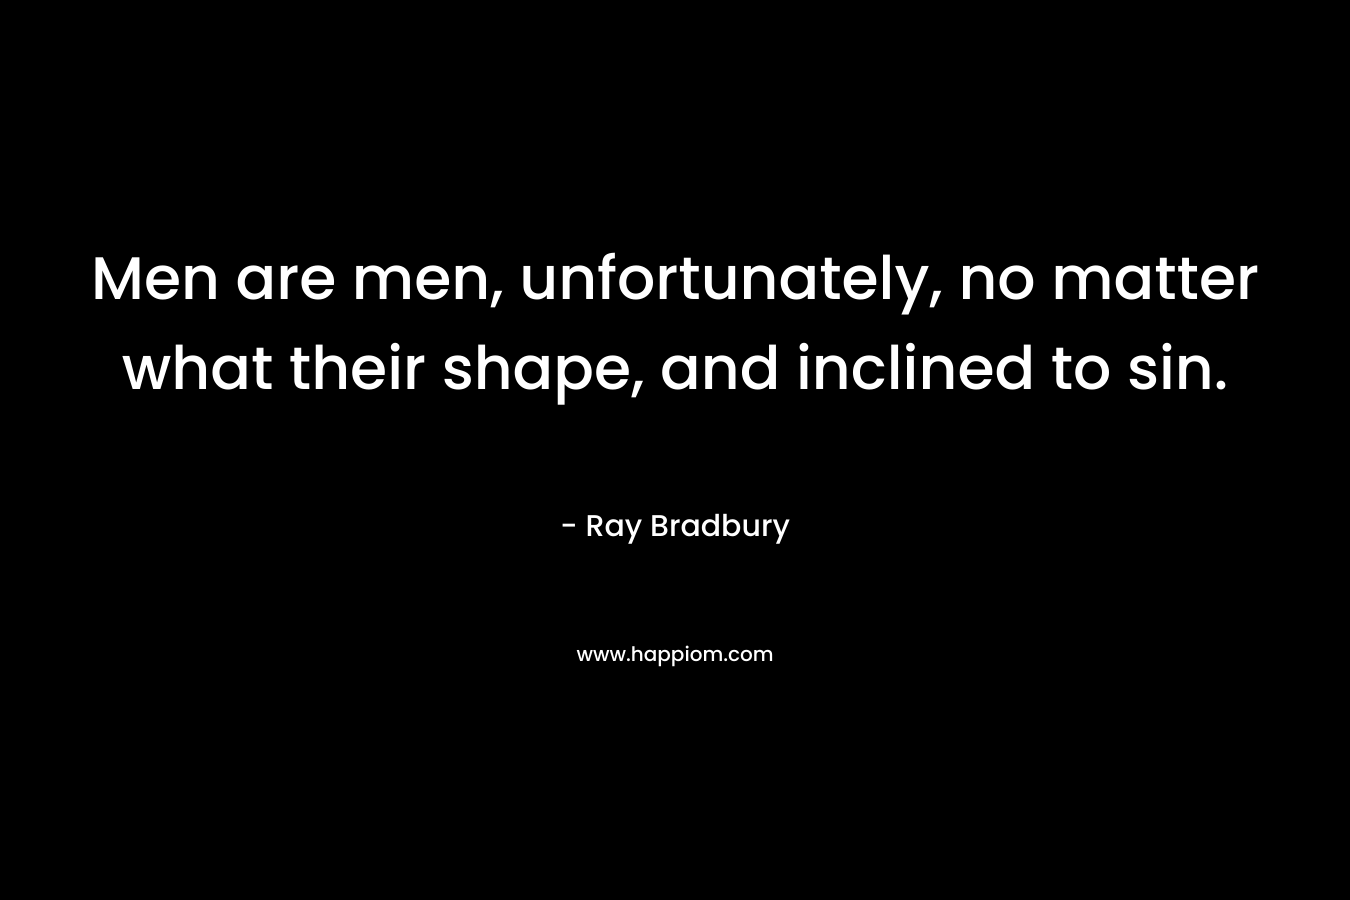 Men are men, unfortunately, no matter what their shape, and inclined to sin.